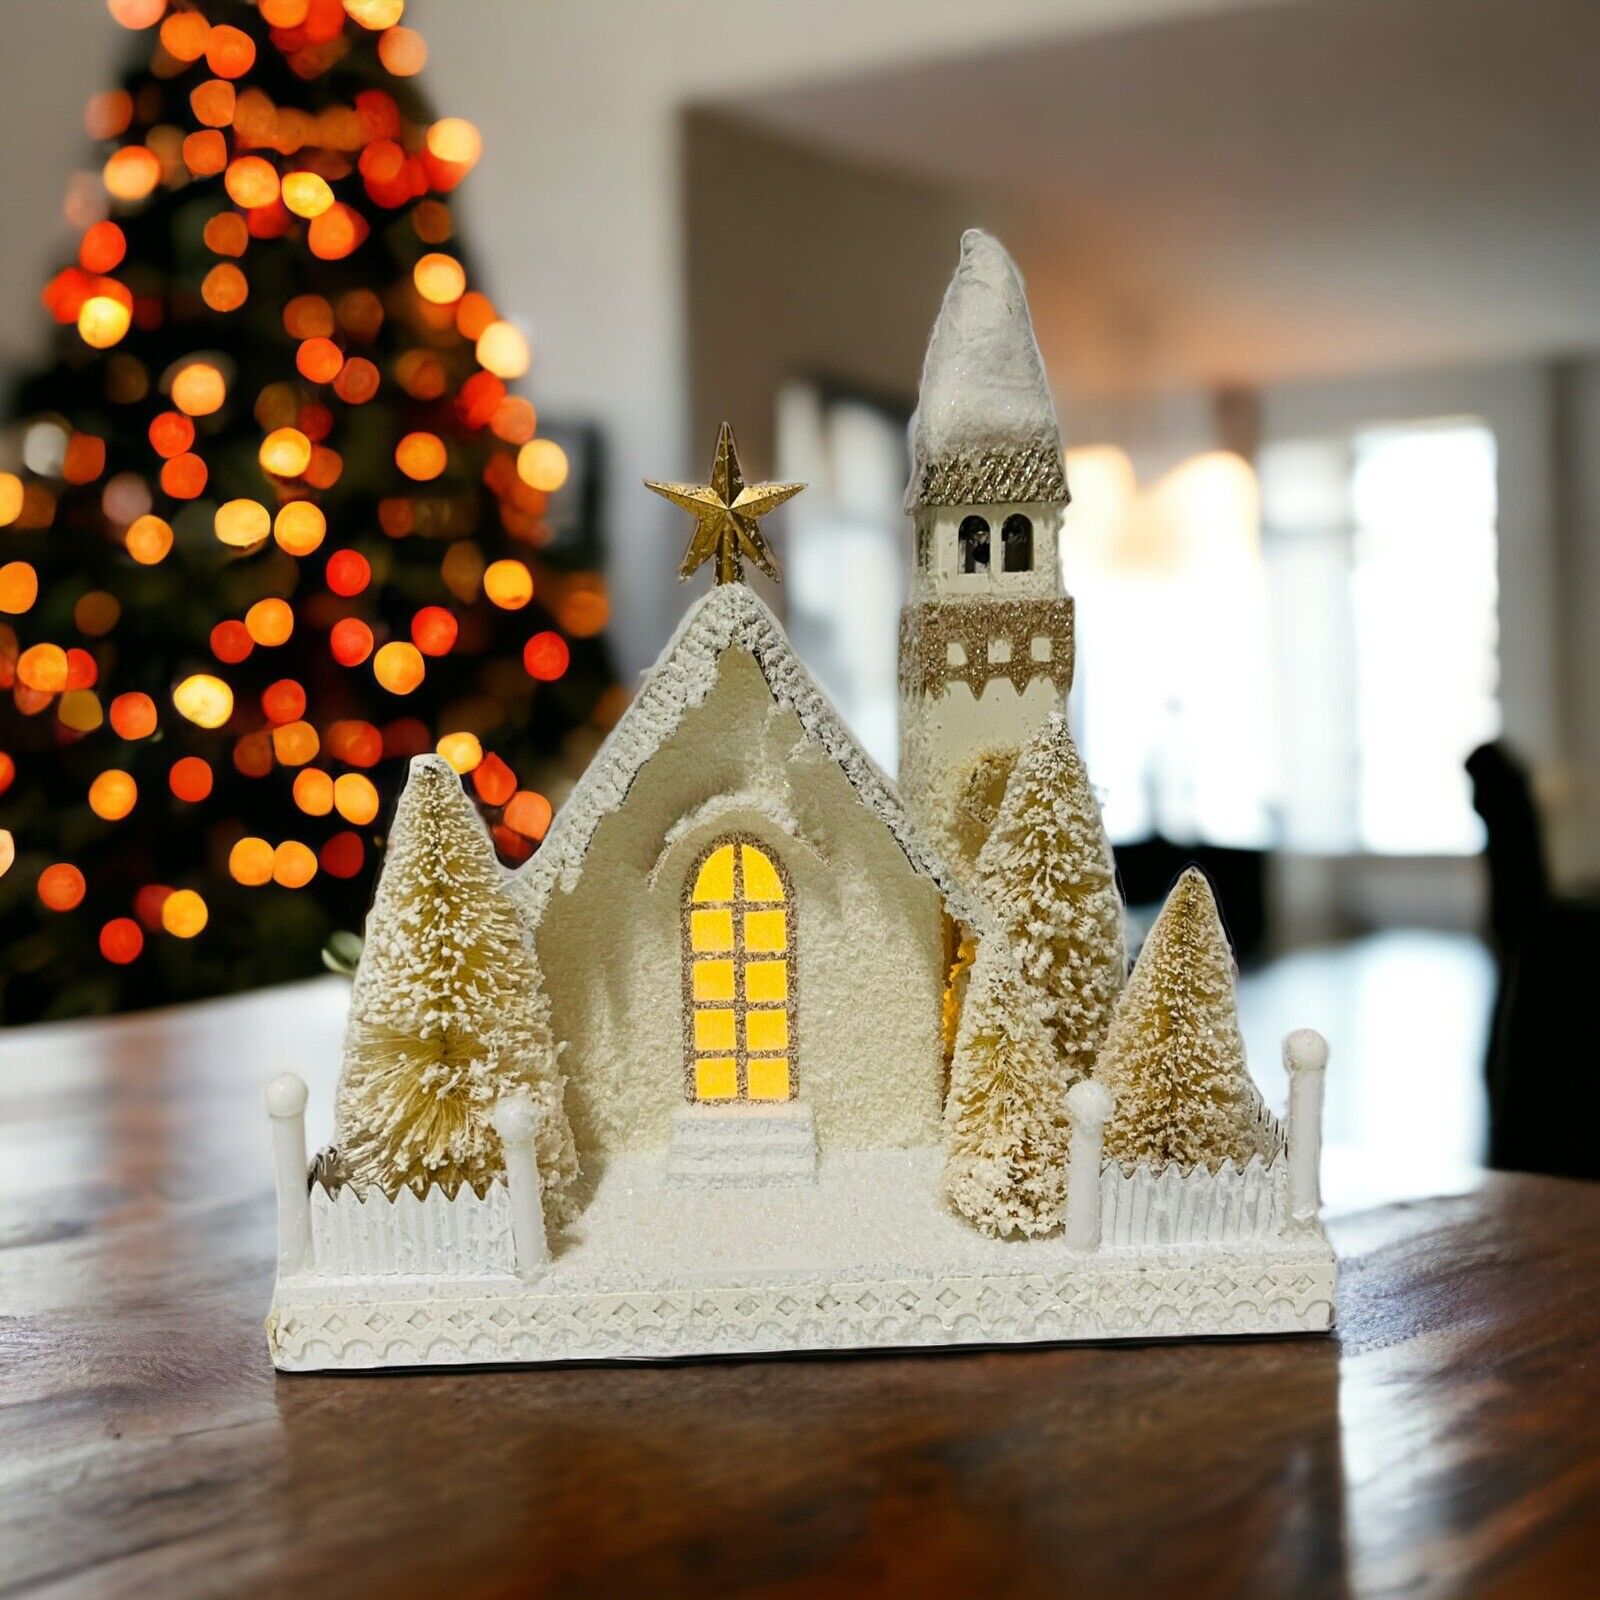 Pier 1 One Christmas White Church Bell Tower Paper Light-Up Cottagecore Snow